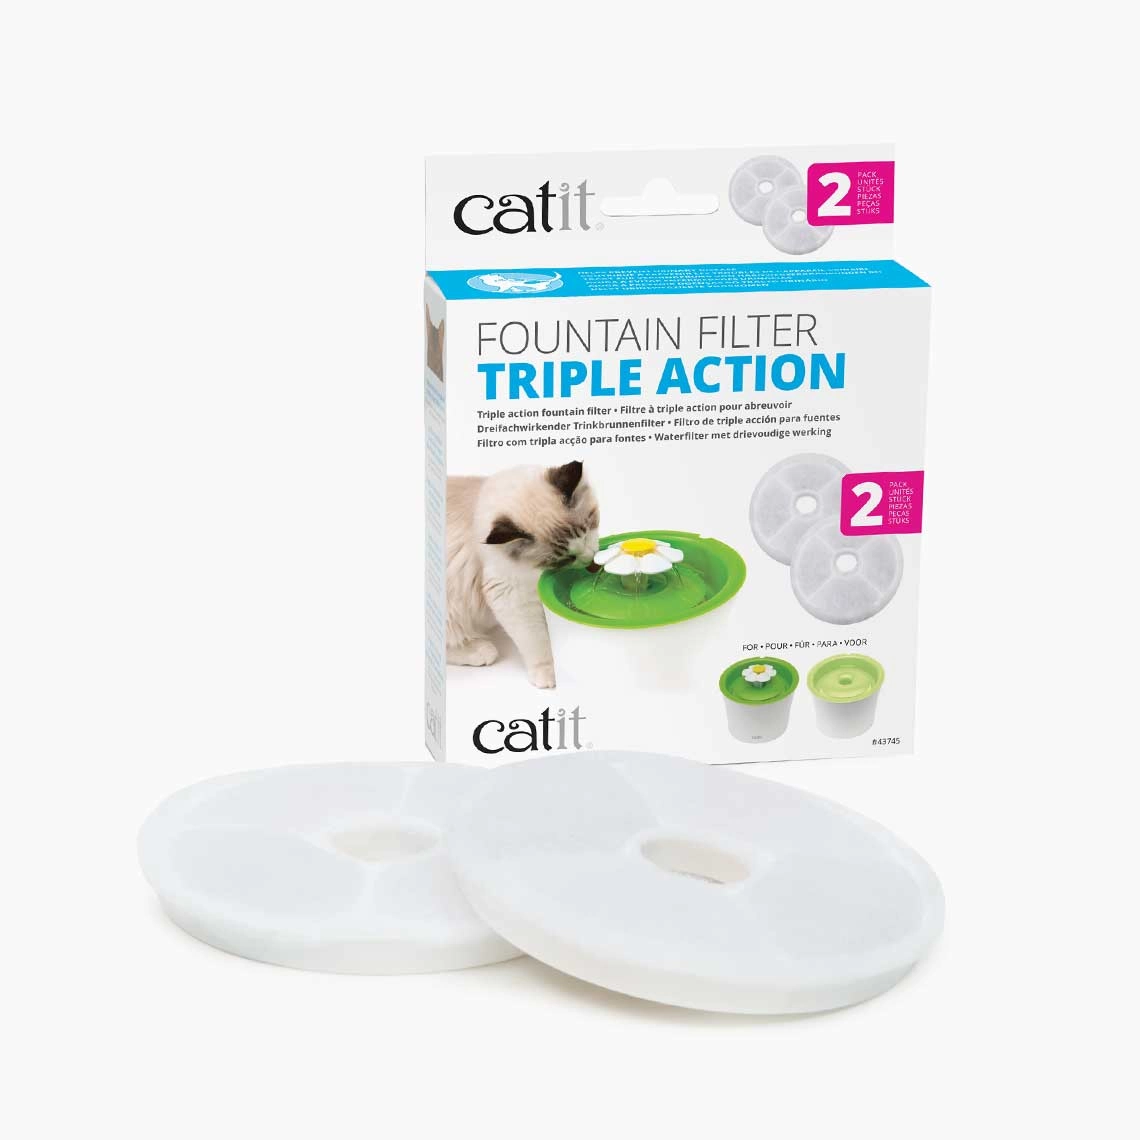 Catit - Catit Triple Action Fountain filter - 2 Pack